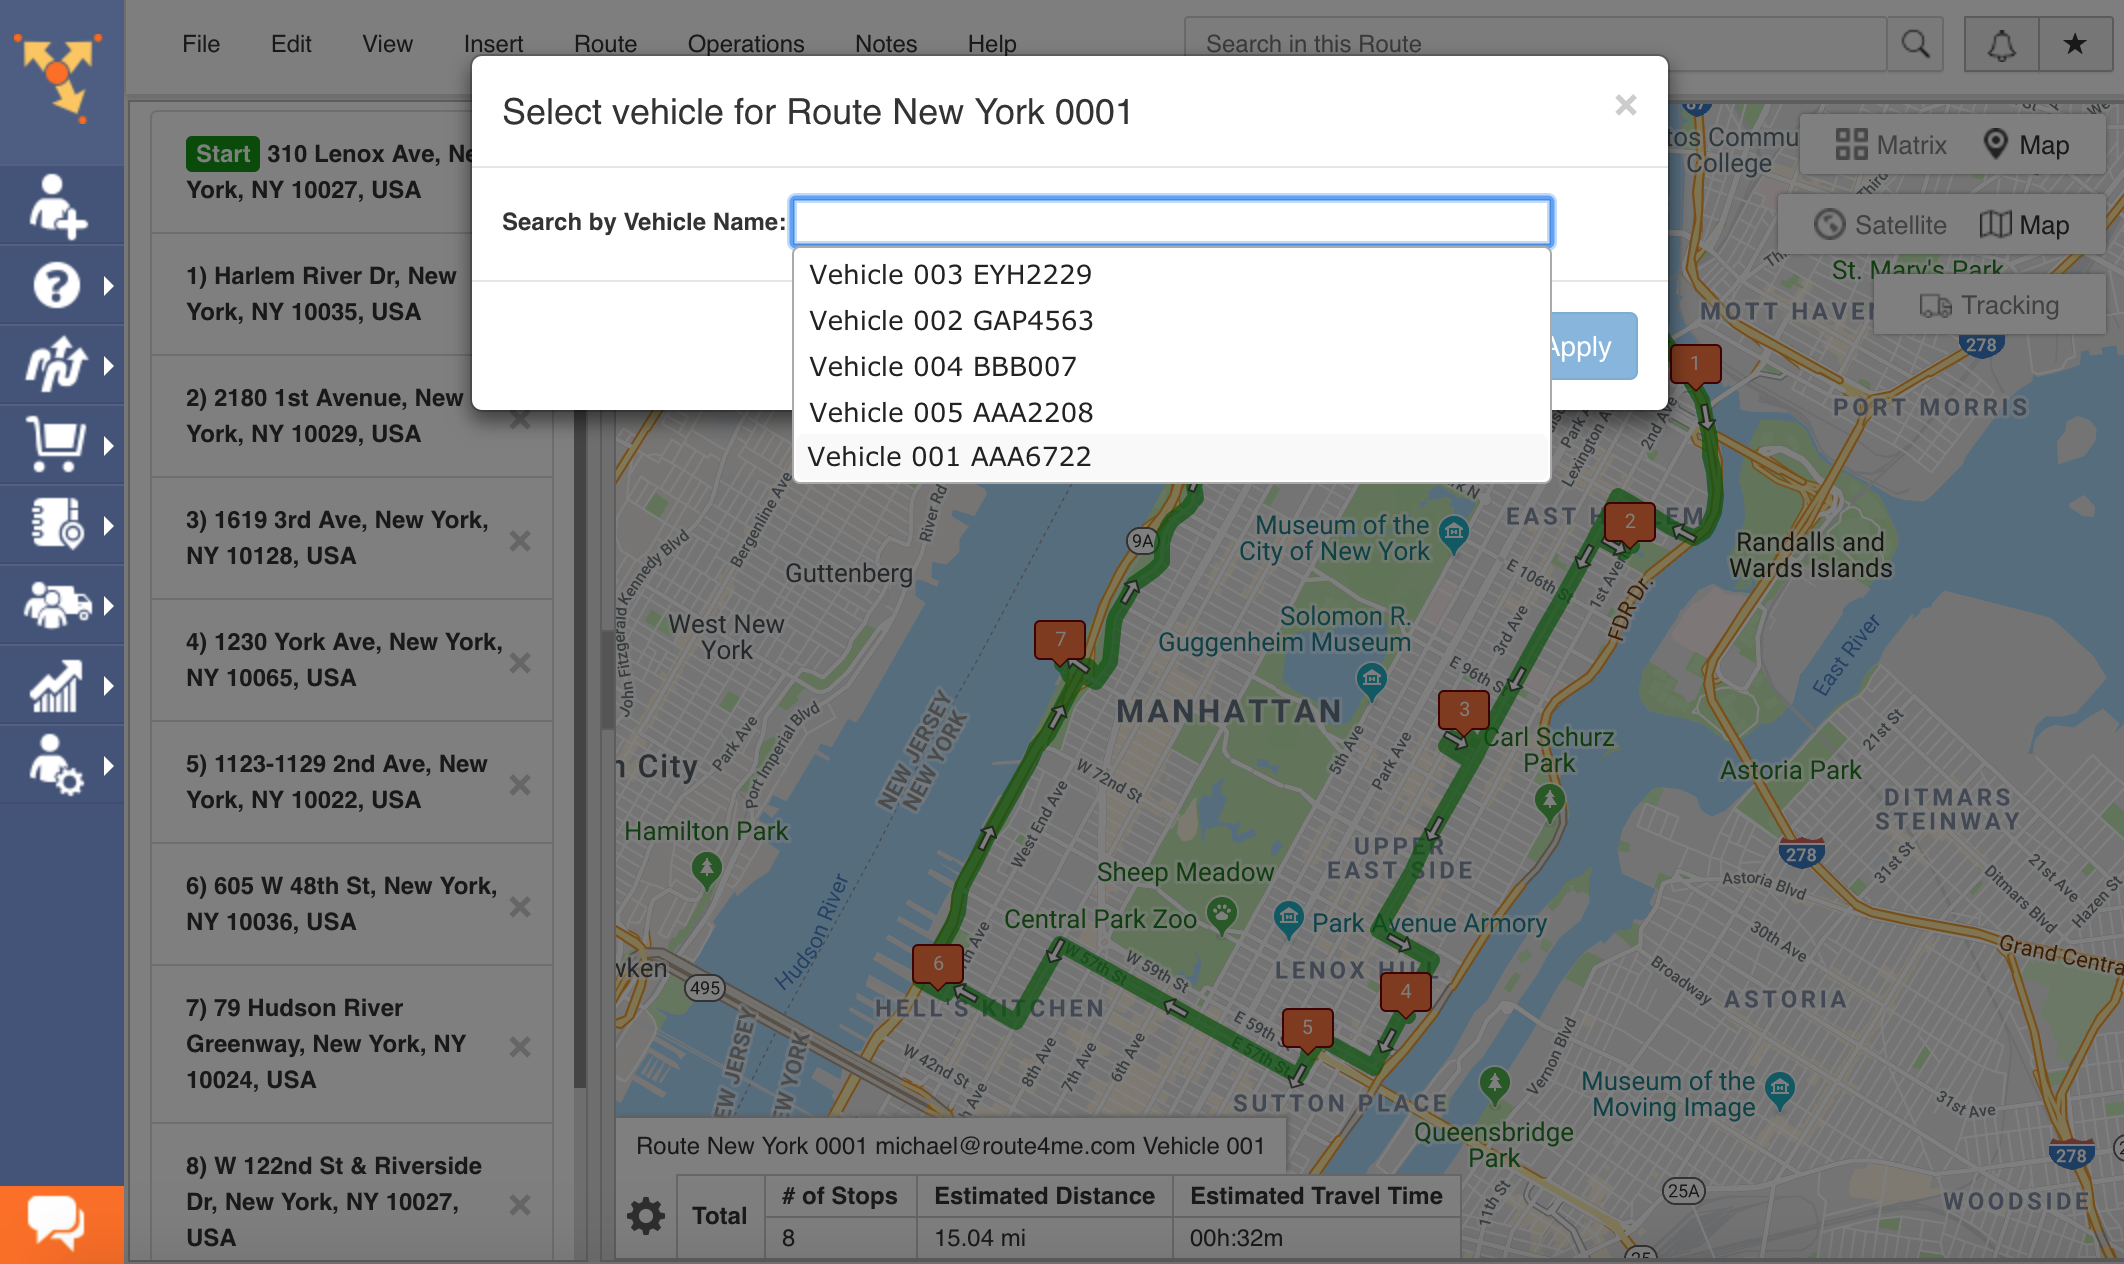 Assigning Users and Vehicles to Routes